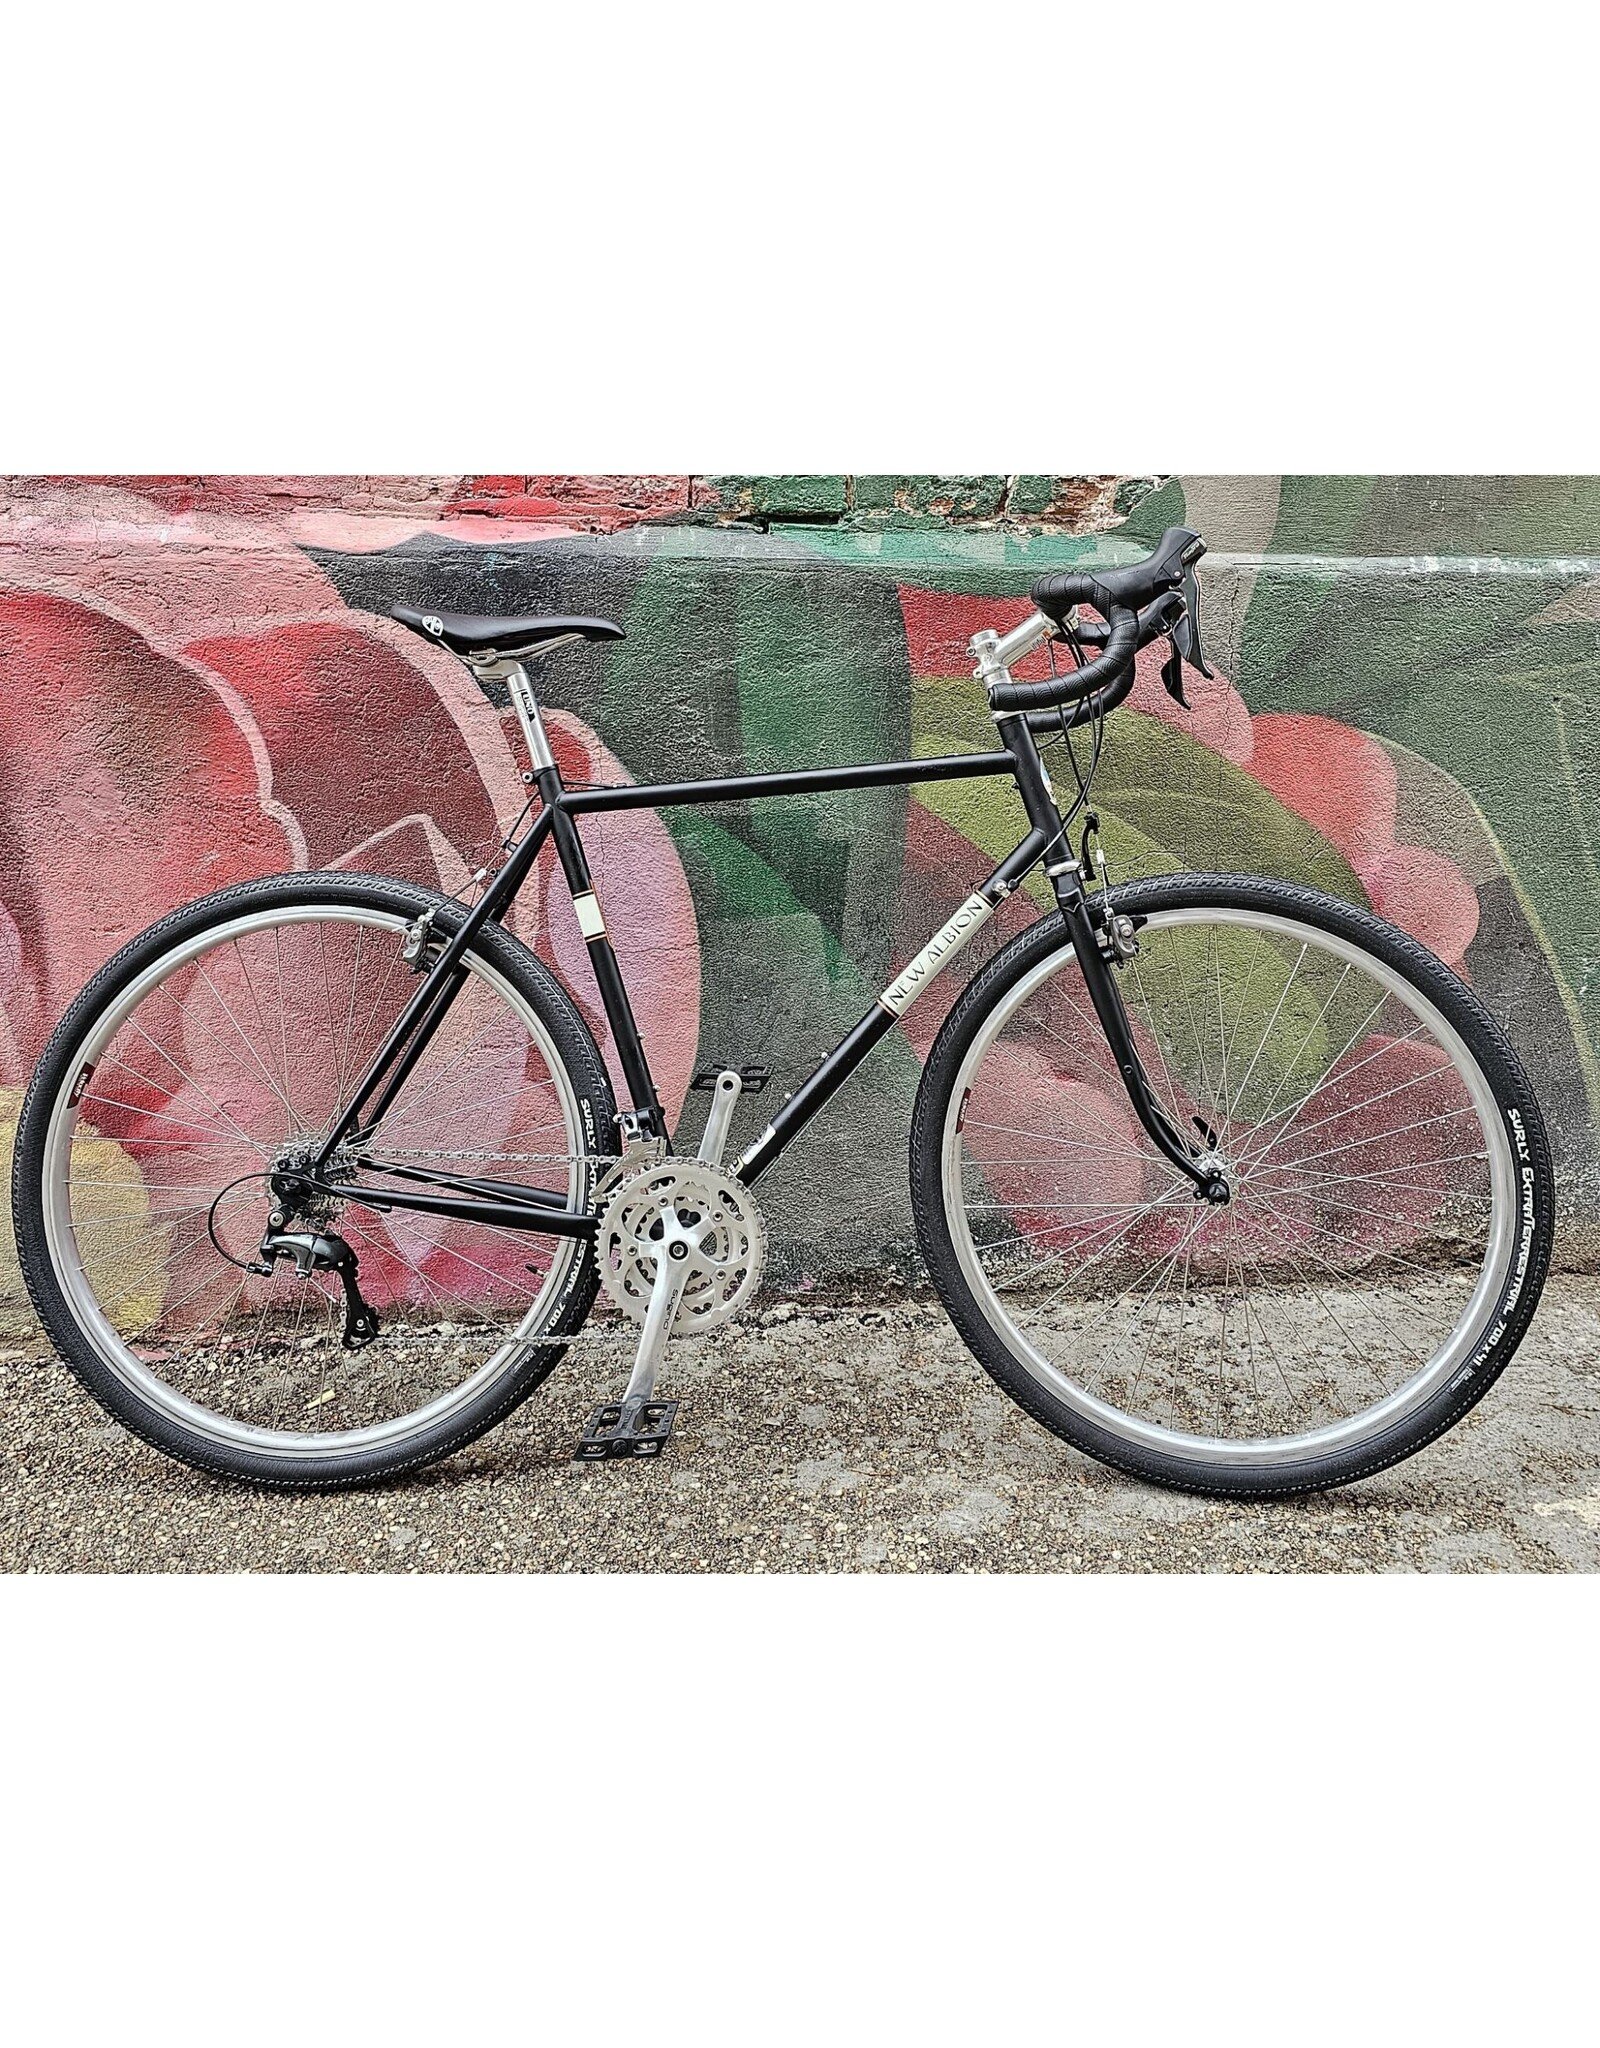 New Albion Cycles New Albion Privateer Shop Build Black Triple Touring 58cm